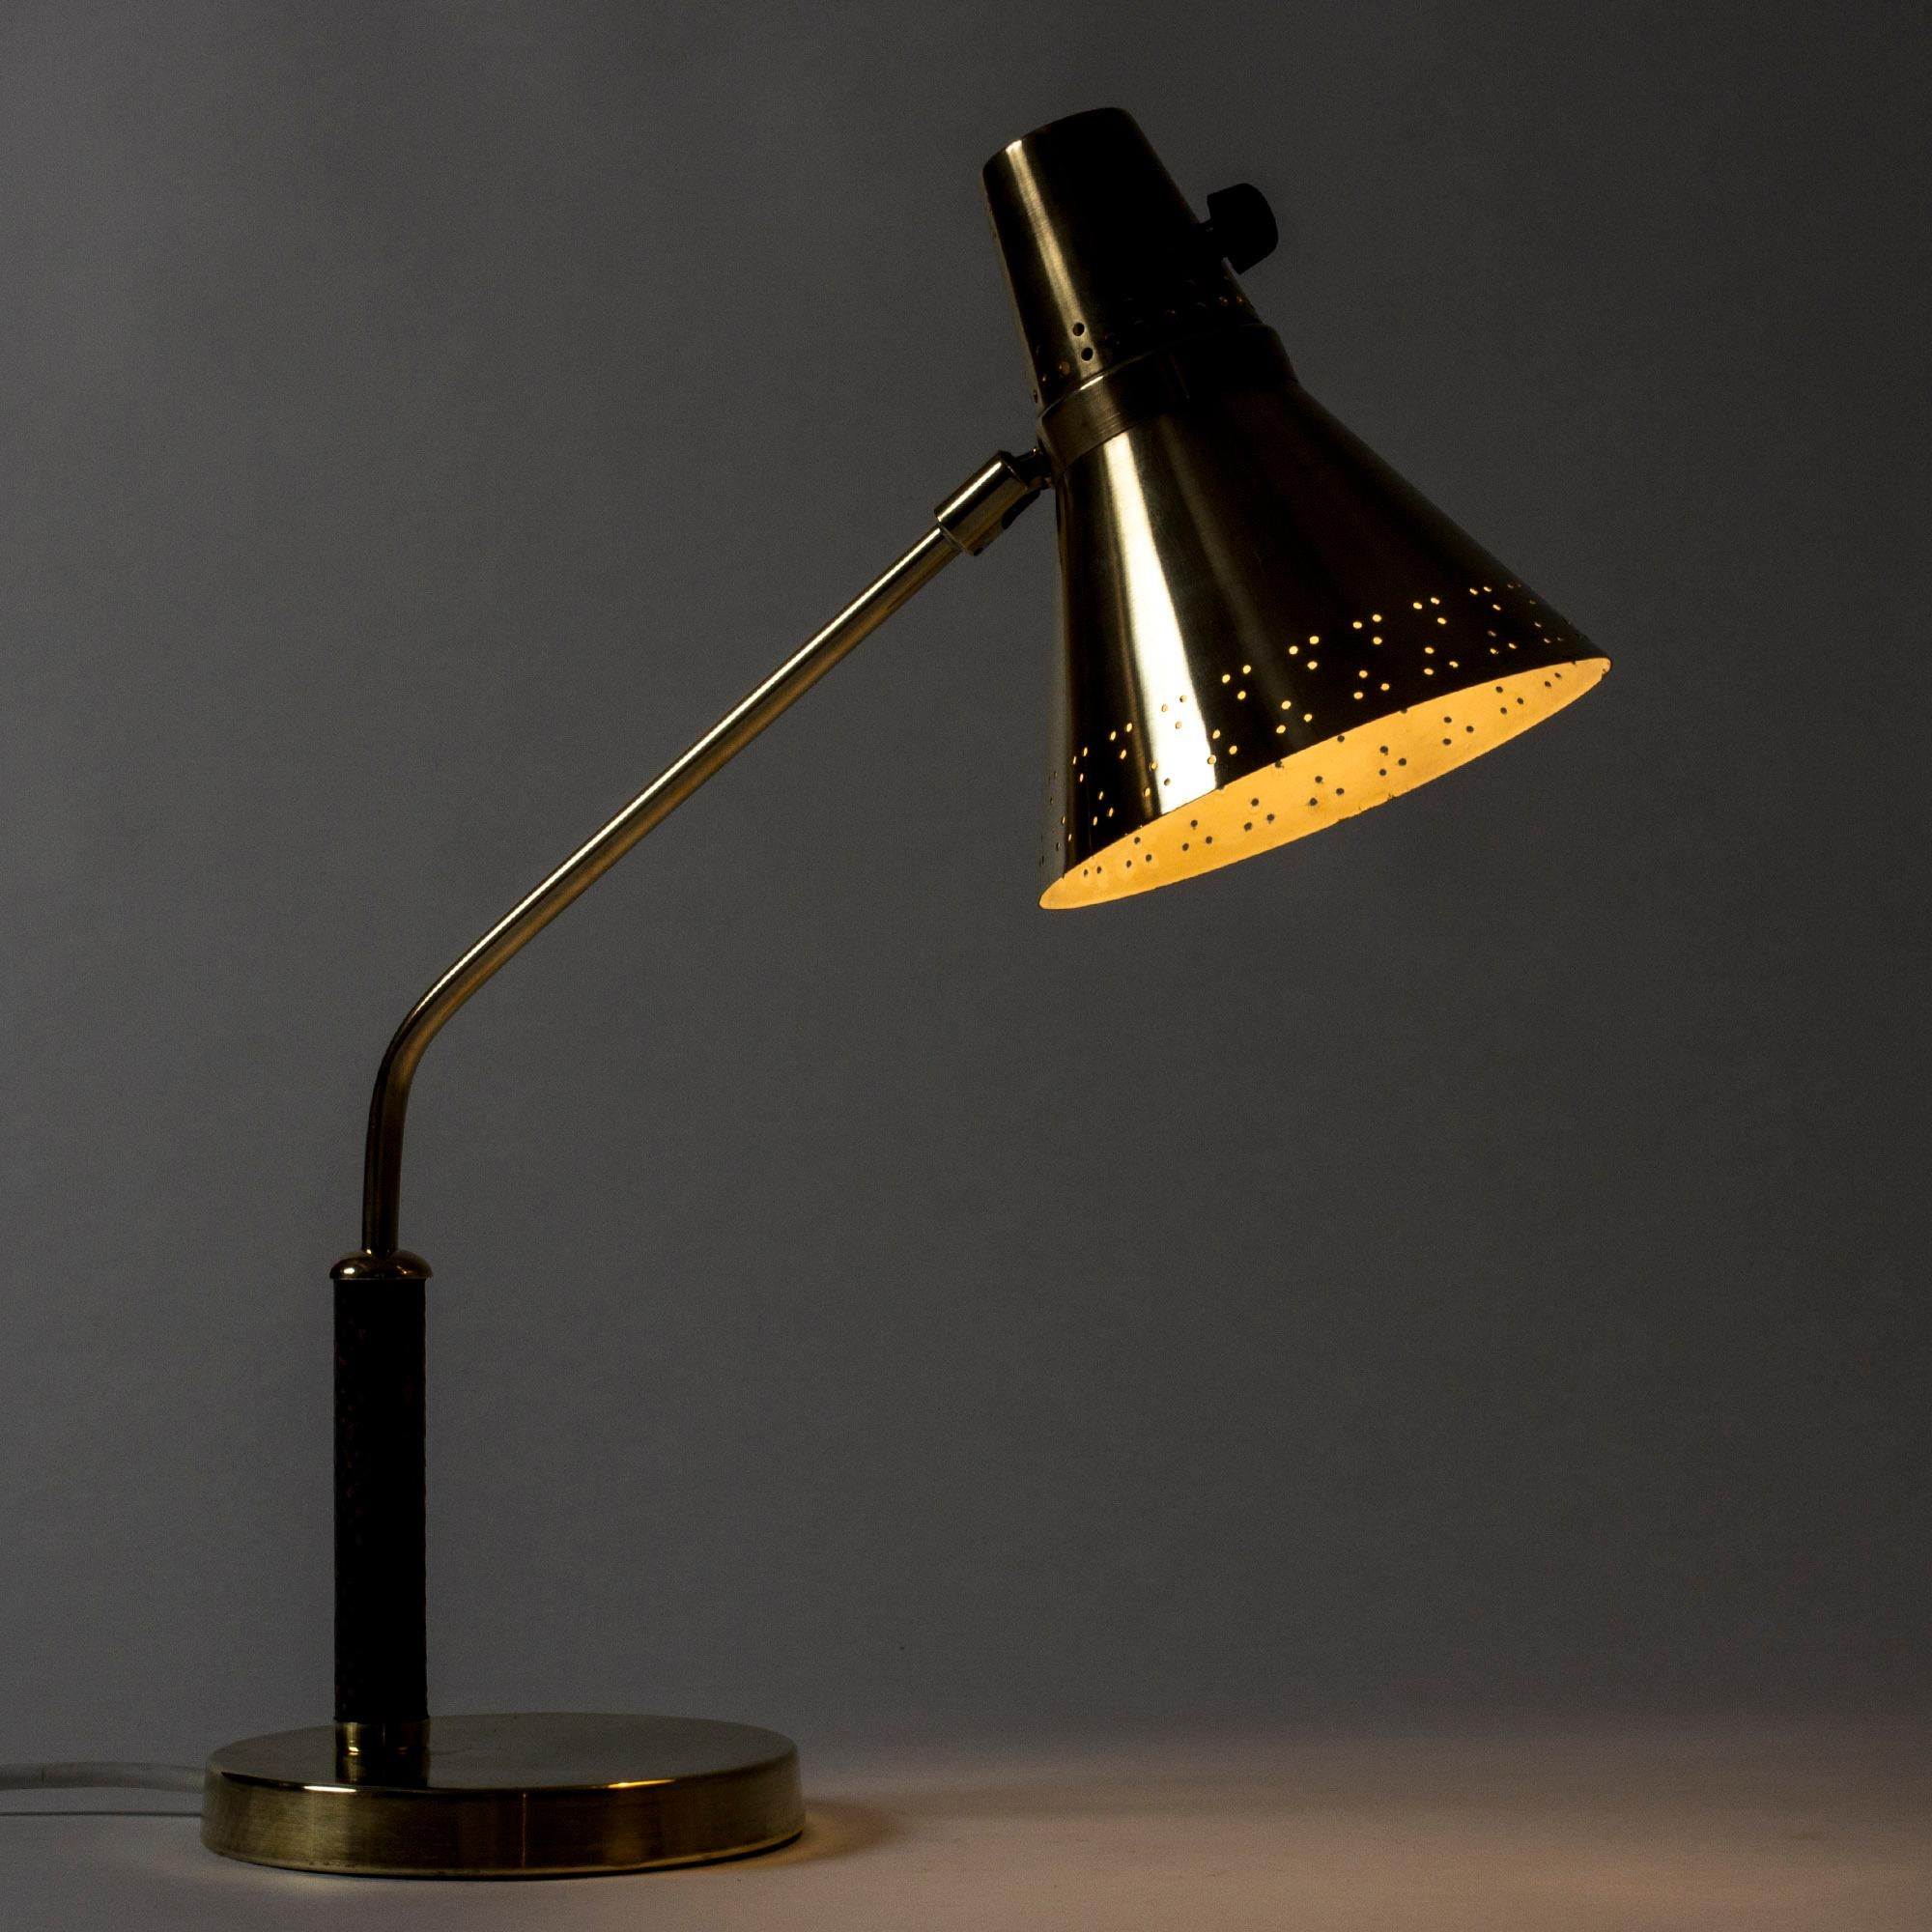 Very elegant desk or table lamp from E. Hansson & Co, made from brass. Shade with a perforated pattern that looks beautiful in the dark, snakeskin upholstered handle.